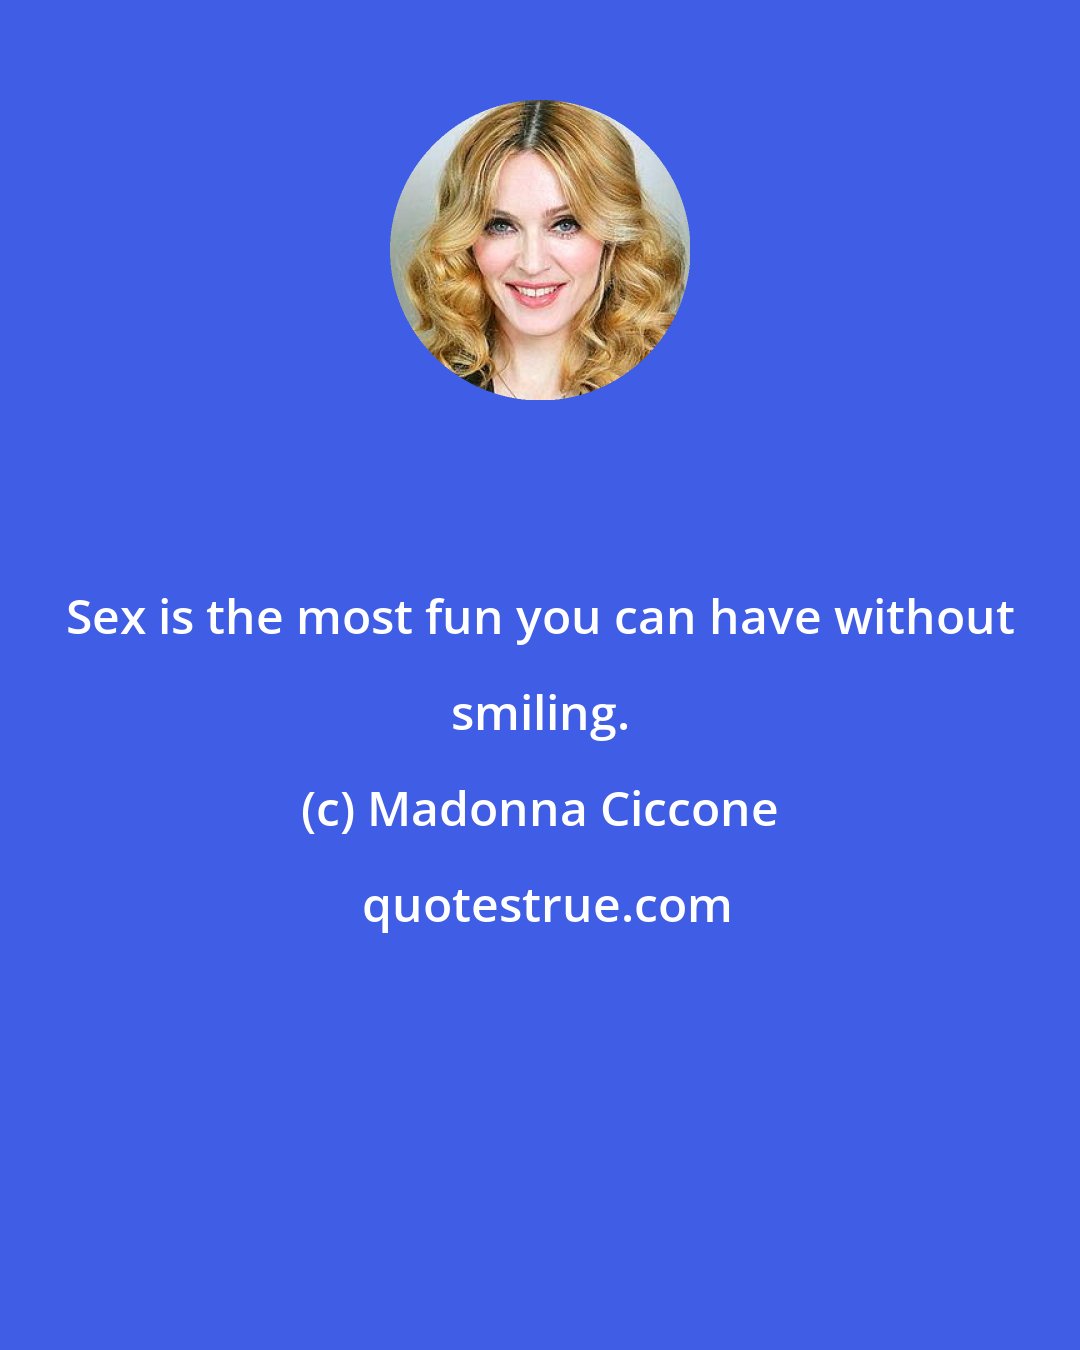 Madonna Ciccone: Sex is the most fun you can have without smiling.